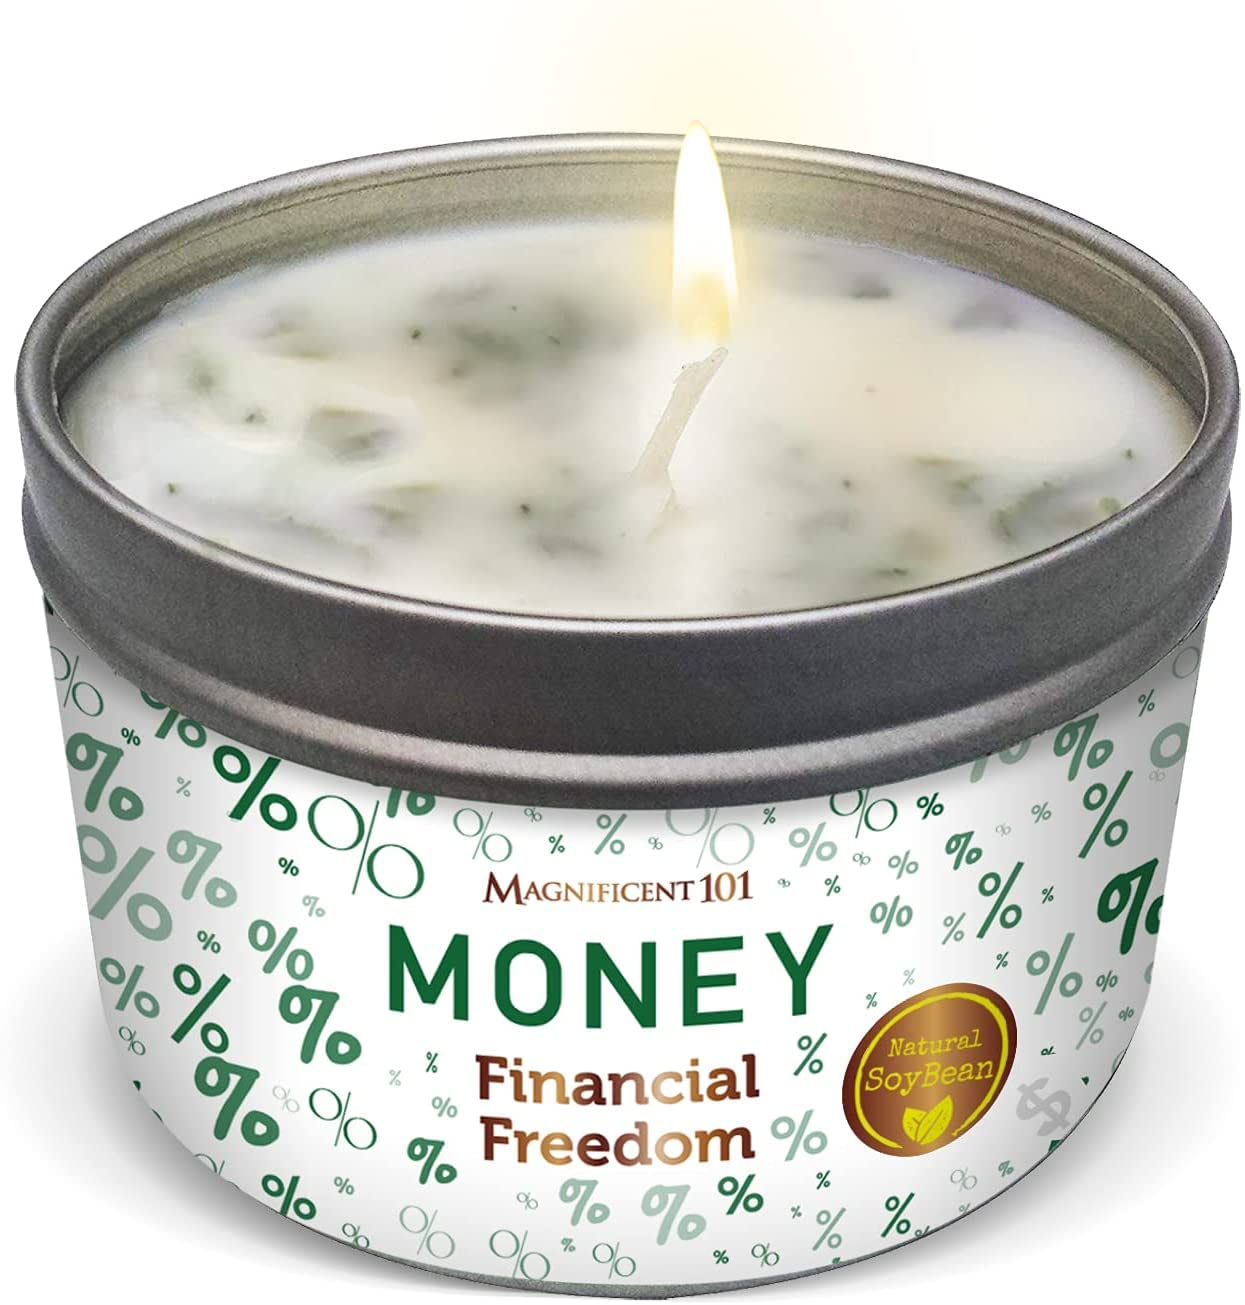 MAGNIFICENT 101 Money Financial Freedom Aromatherapy Candle - Clove, Cinnamon, Citronella Scented Natural Soybean Wax Tin Candle